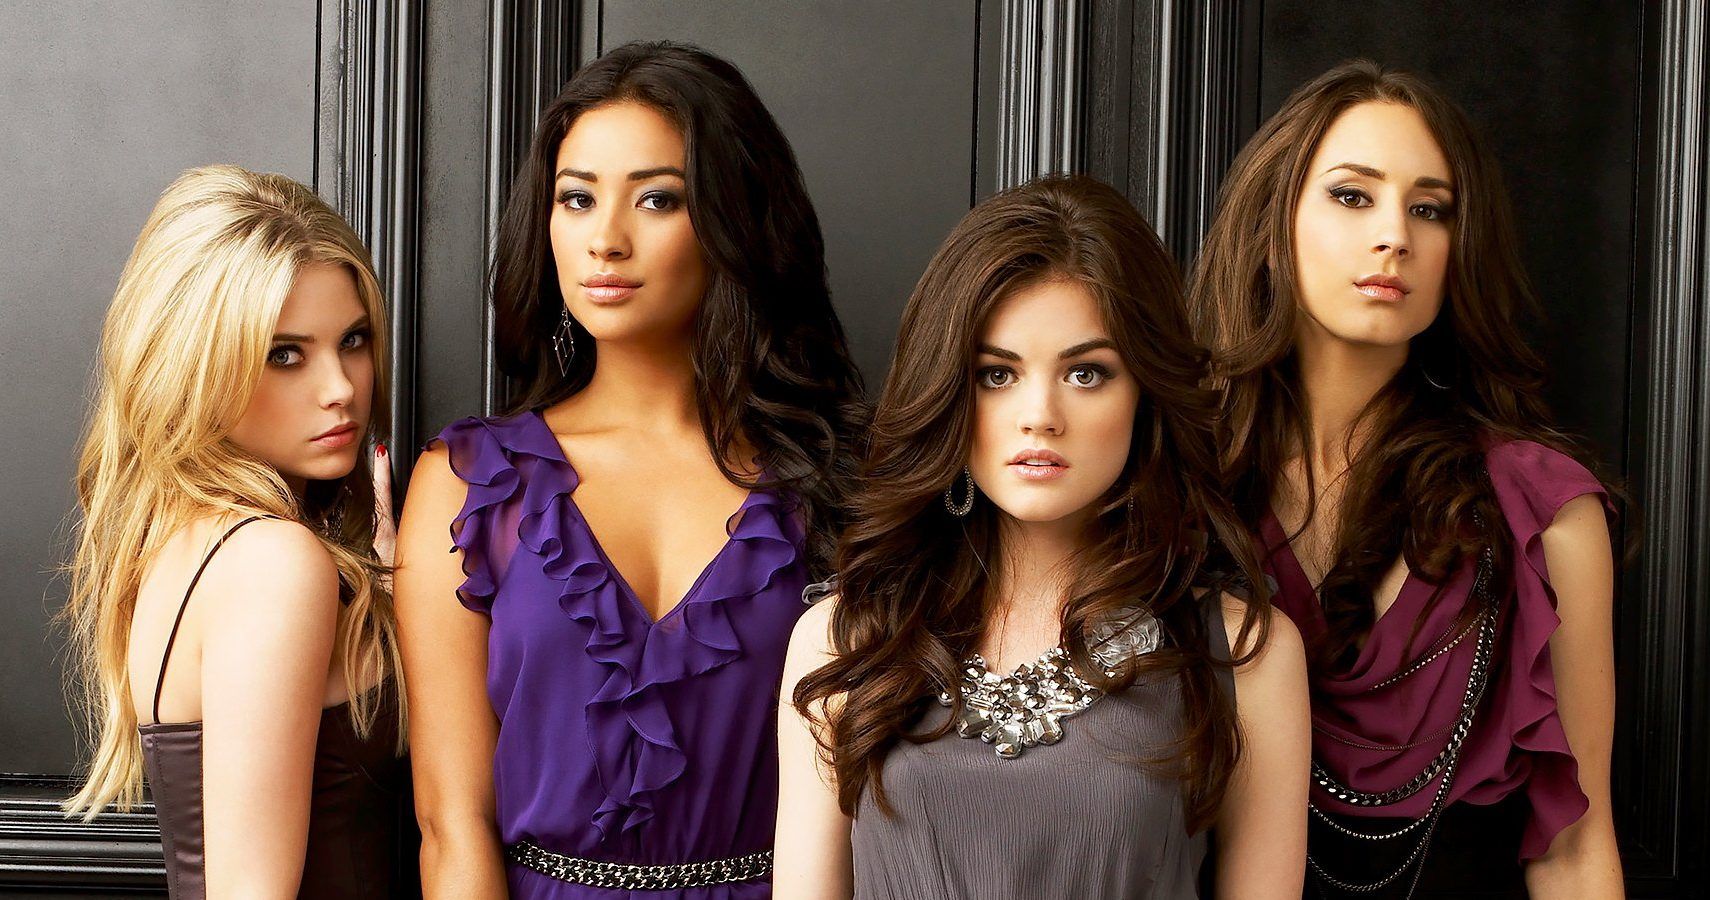 Will The Original 'Pretty Little Liars' Cast Return For The New Reboot? - Pretty Little Liars Who Is A In The Show